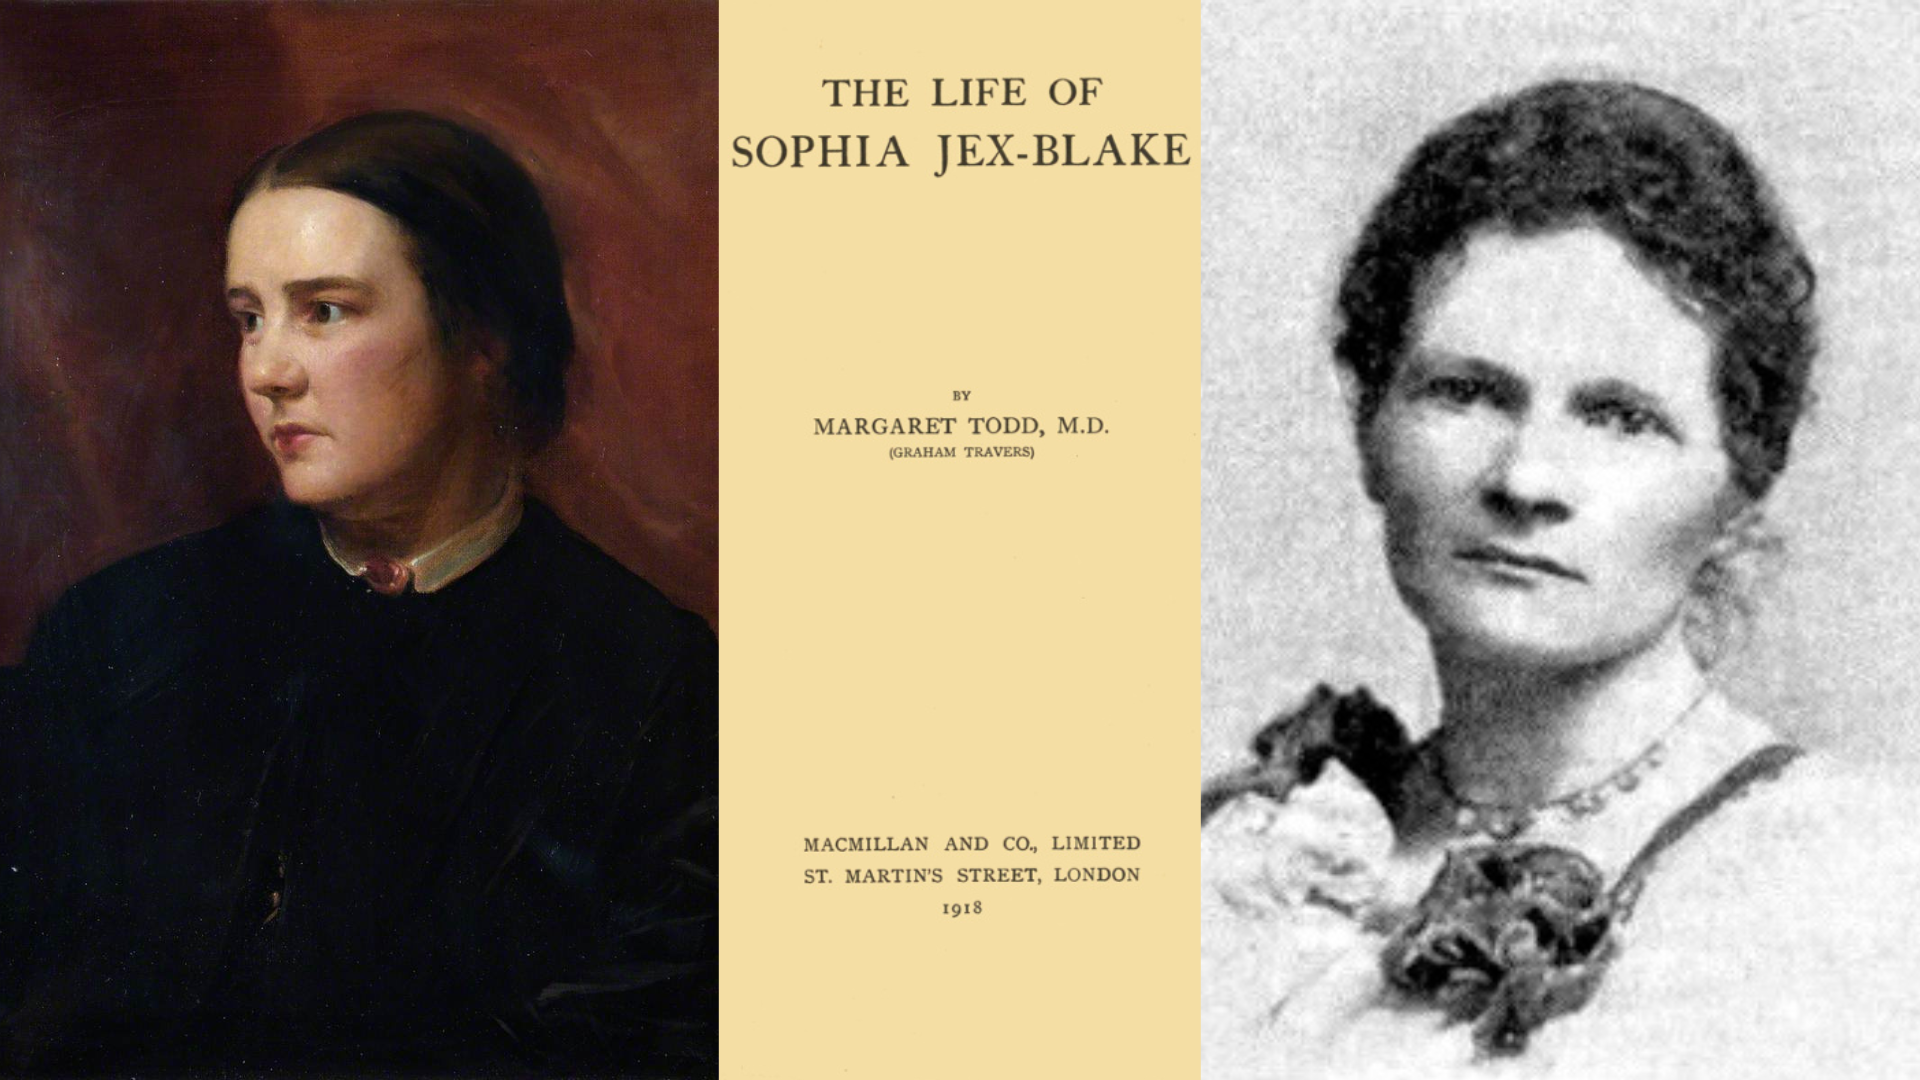 Three images: a portrait of Sophia Jex-Blake from 1865, the title page of The Life of Sophia Jex-Blake by Margaret Todd, and a black and white photograph of Margaret Todd from c. 1900. 